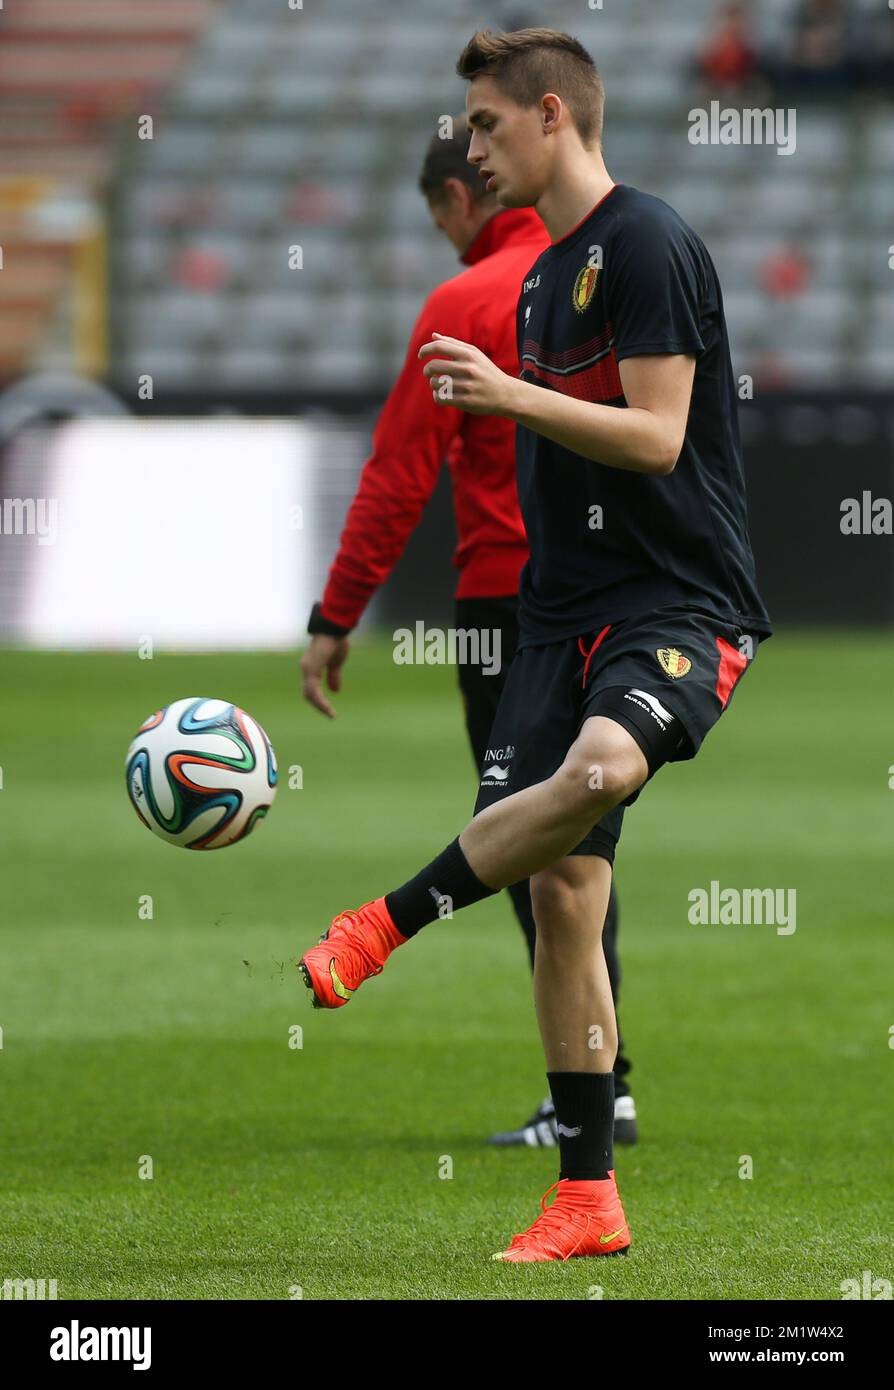 Belgium's Adnan Januzaj pictured in action during the last training session of the Belgian national soccer team Red Devils before their departure to the World Cup in Brazil, on Sunday 08 June 2014, in Brussels. The 2014 Fifa World Cup takes place from 12 June till 13 July in Brazil. BELGA PHOTO VIRGINIE LEFOUR Stock Photo